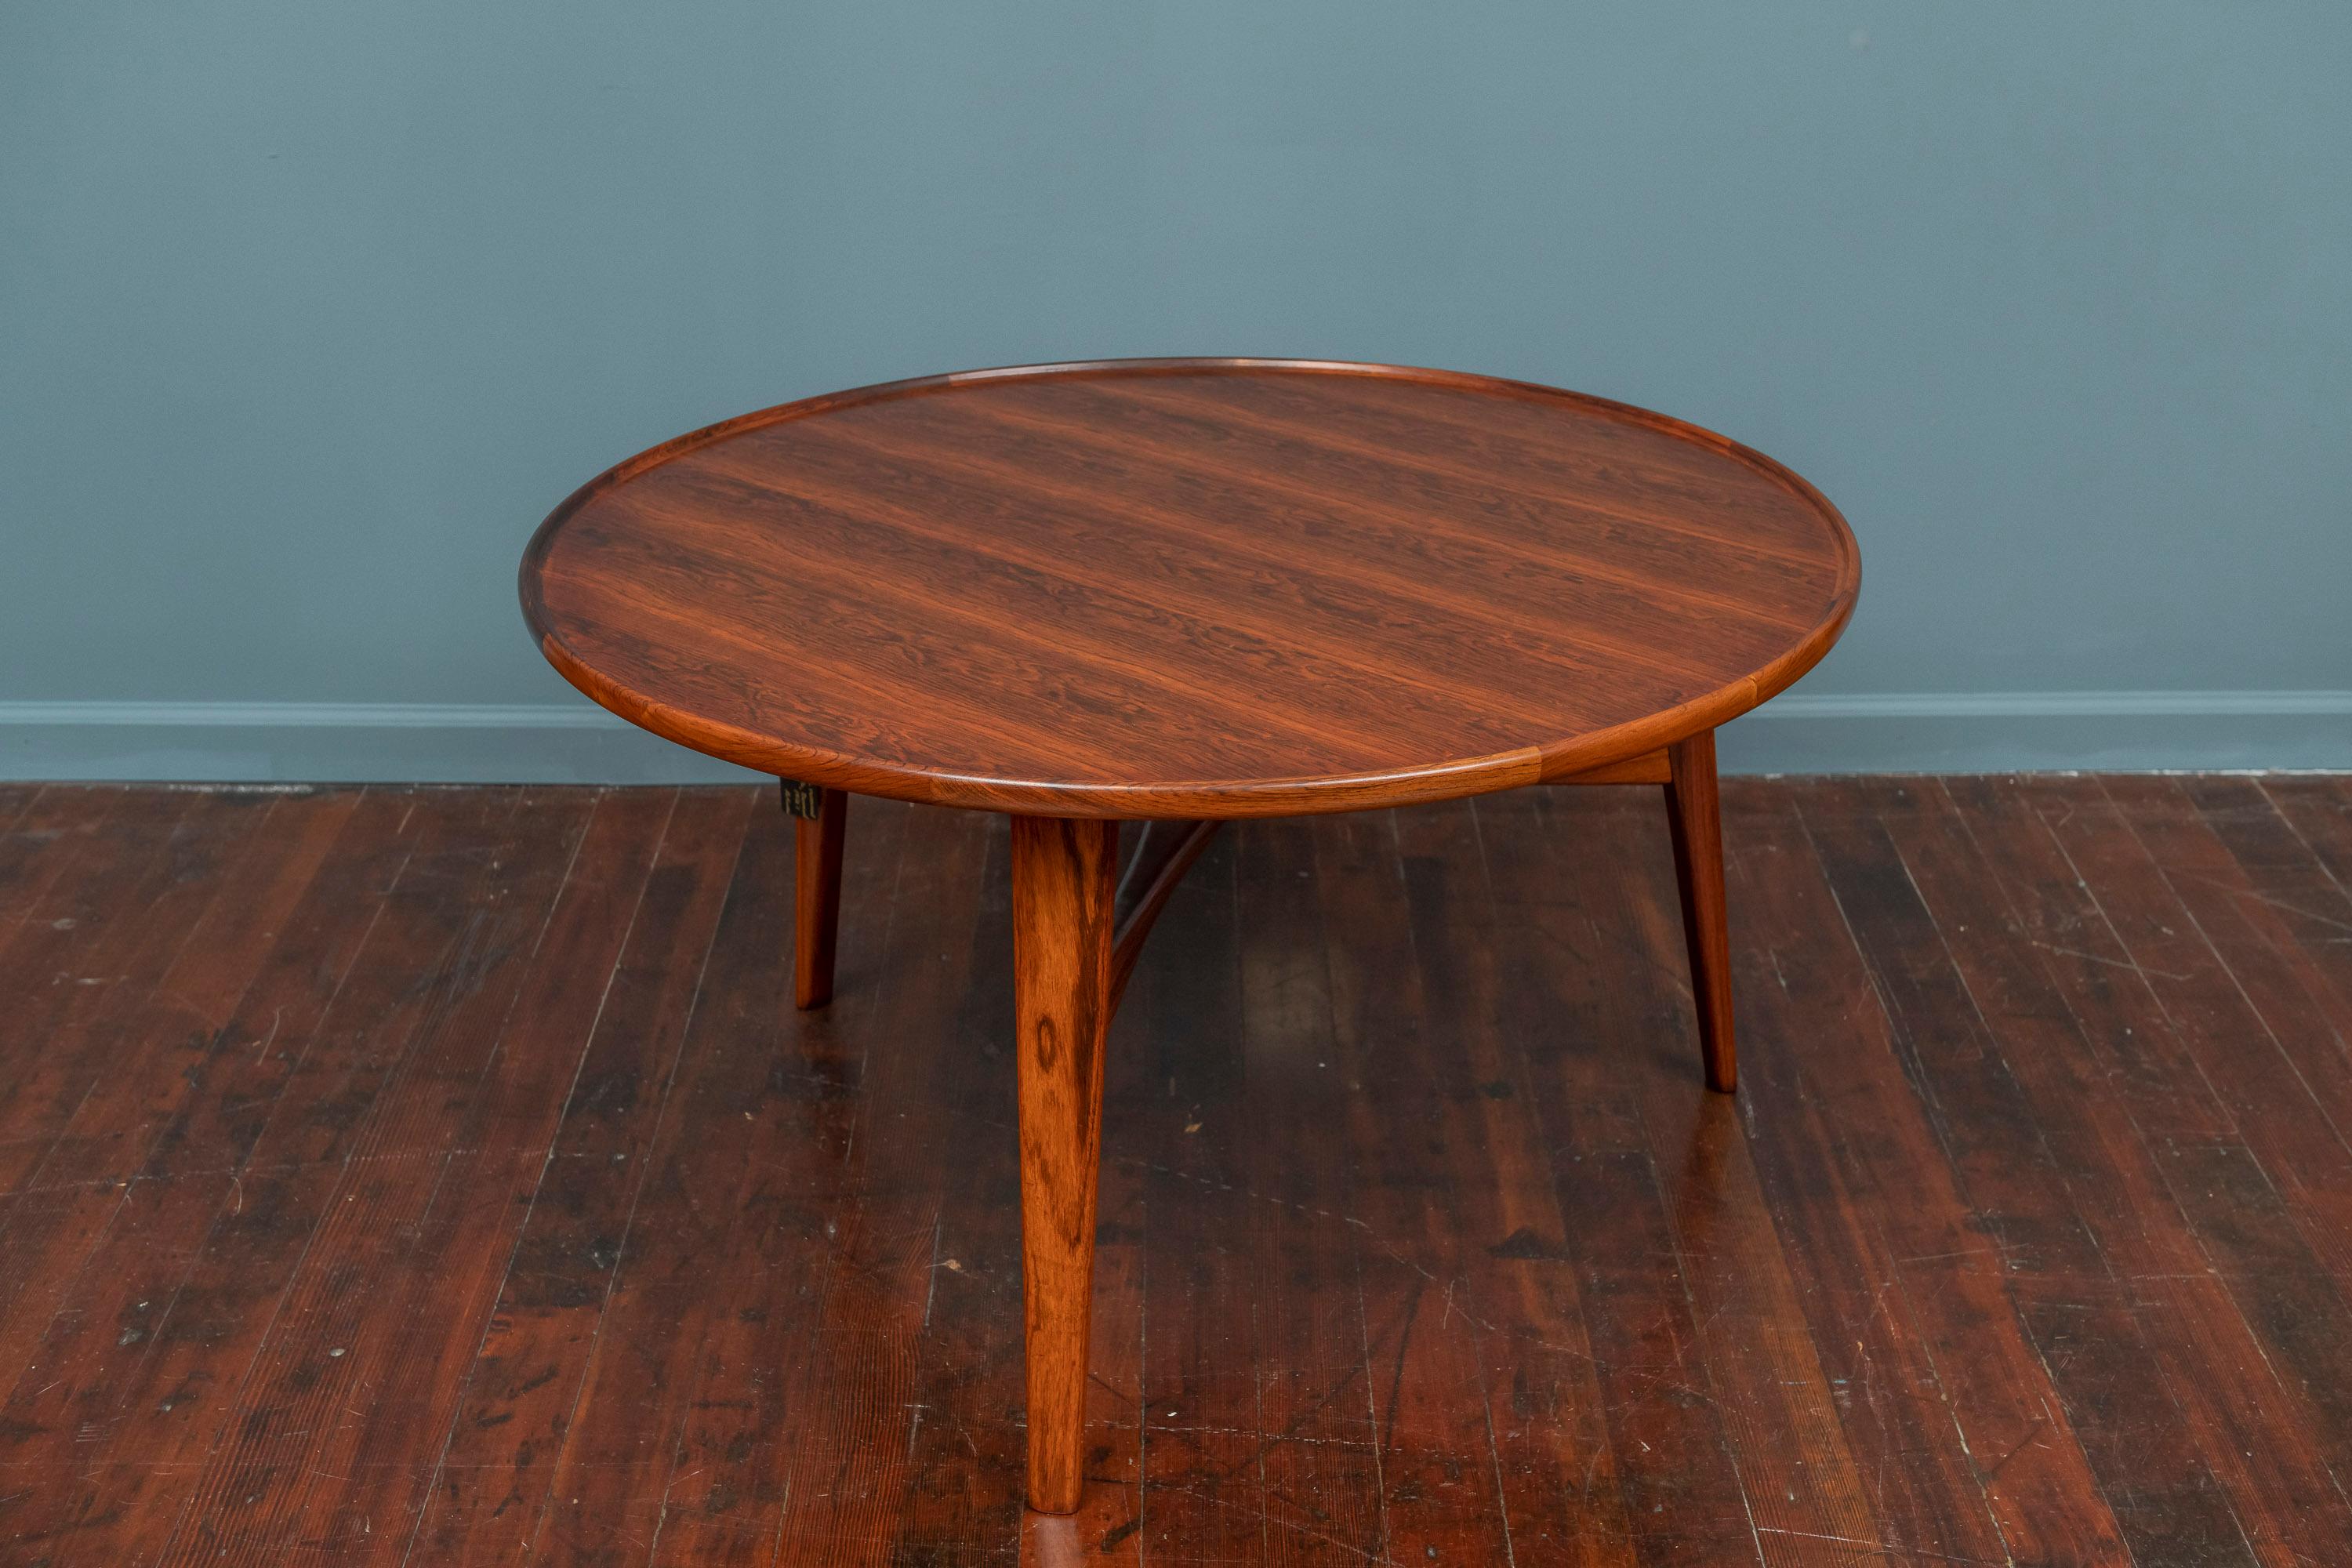 Ejner Larsen and Askel Bender Madsen coffee table for Willy Beck, Denmark. Perfectly refinished rosewood, labeled.